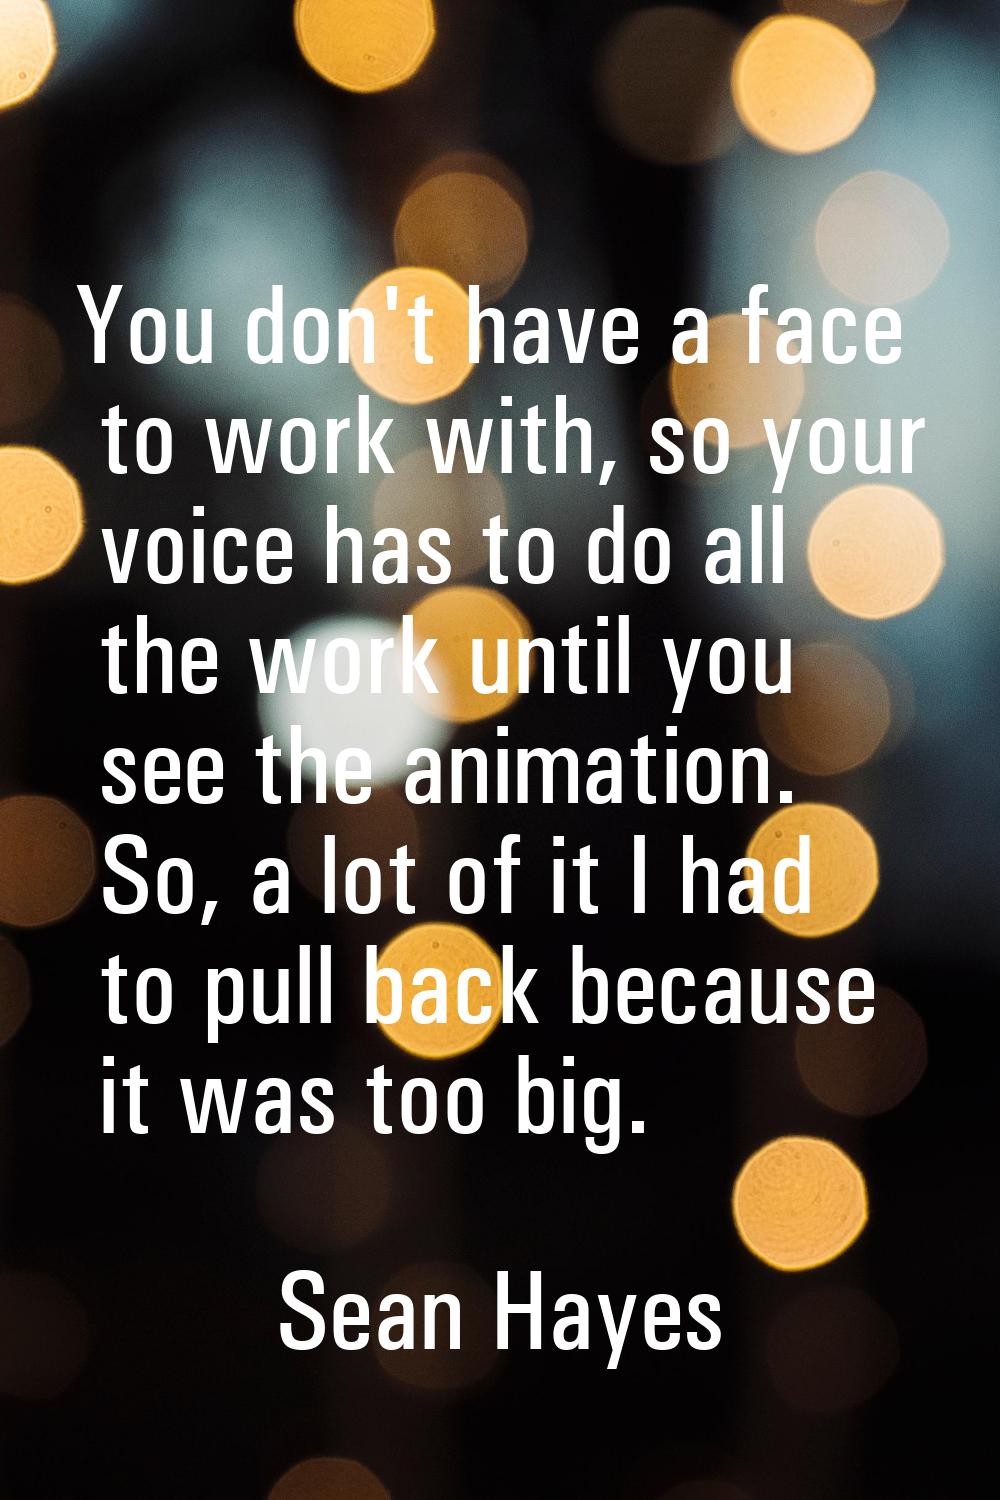 You don't have a face to work with, so your voice has to do all the work until you see the animatio